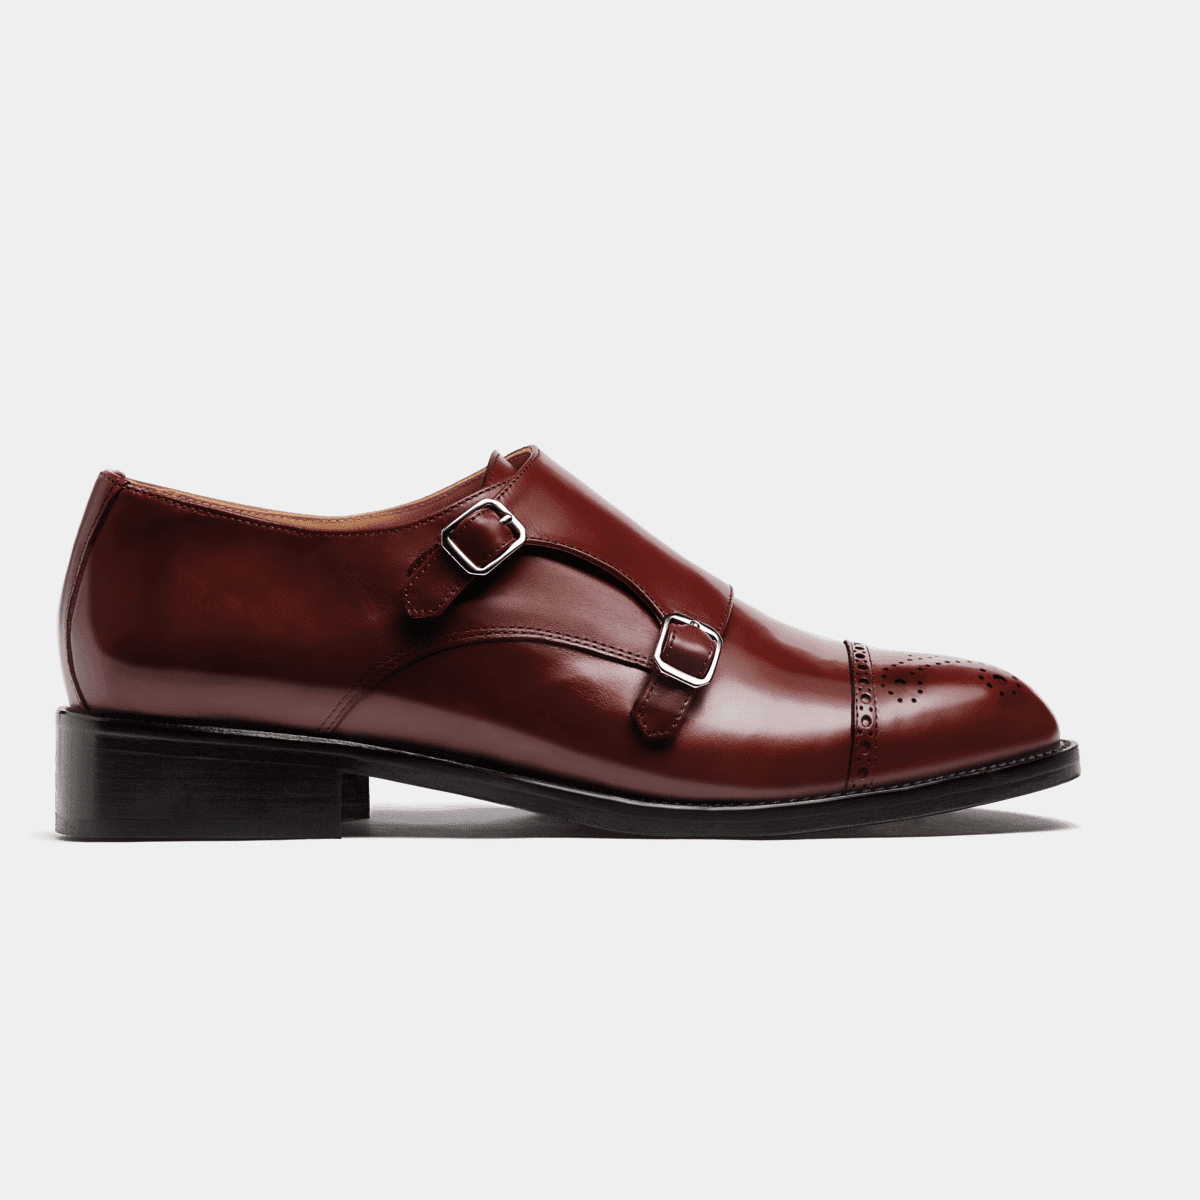 Monk strap brogues - oxblood flora leather | Sumissura